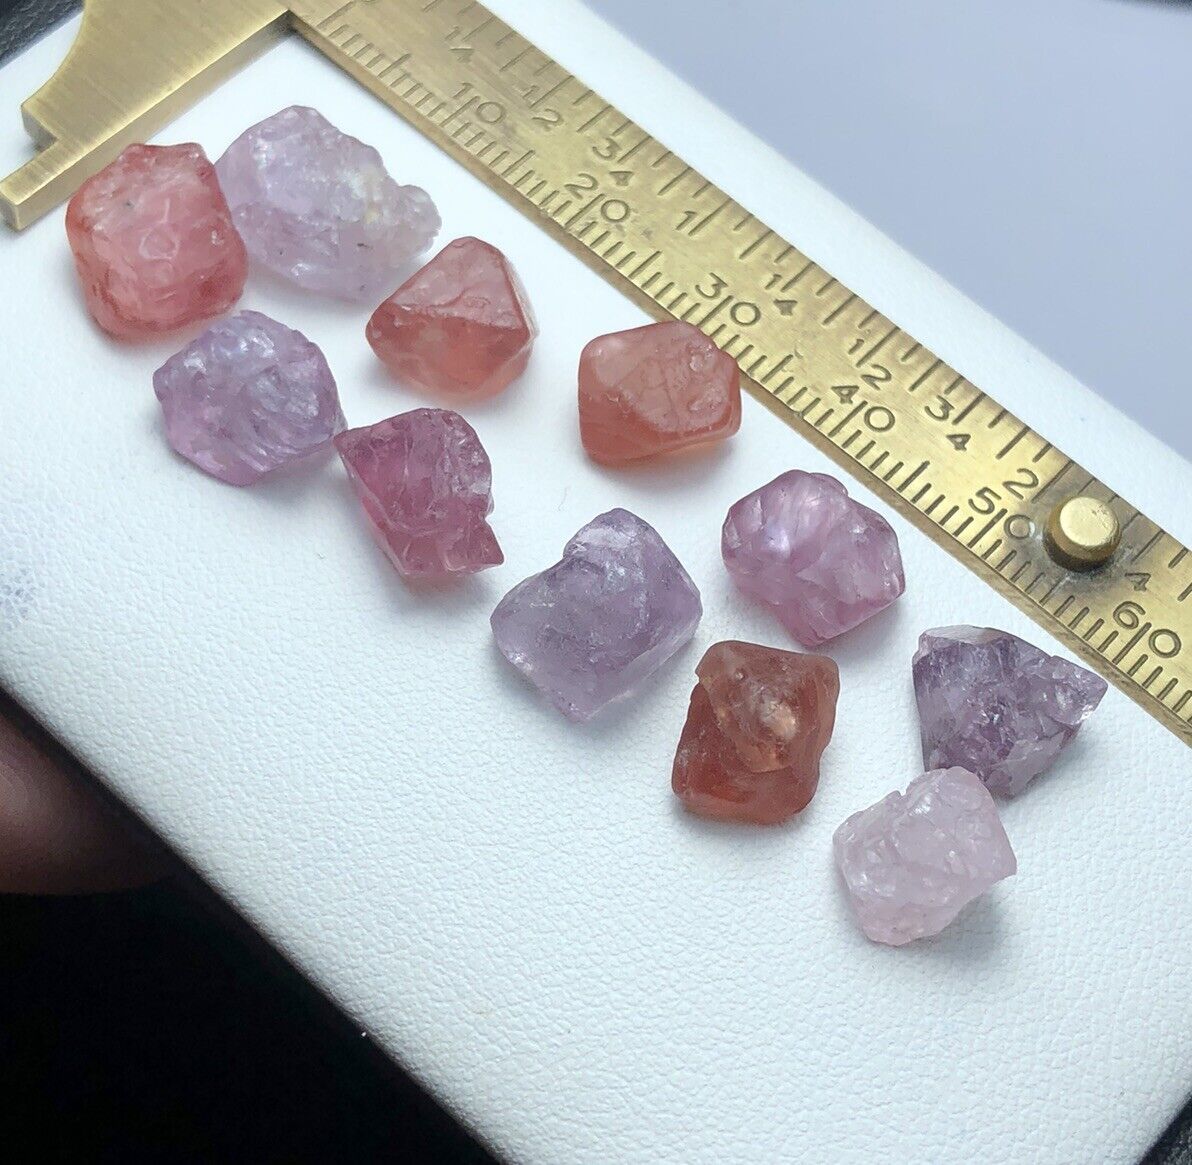 56.5 Crt /11Piece / Beautiful Natural Multi Color Spinel Crystal From Burma Mine